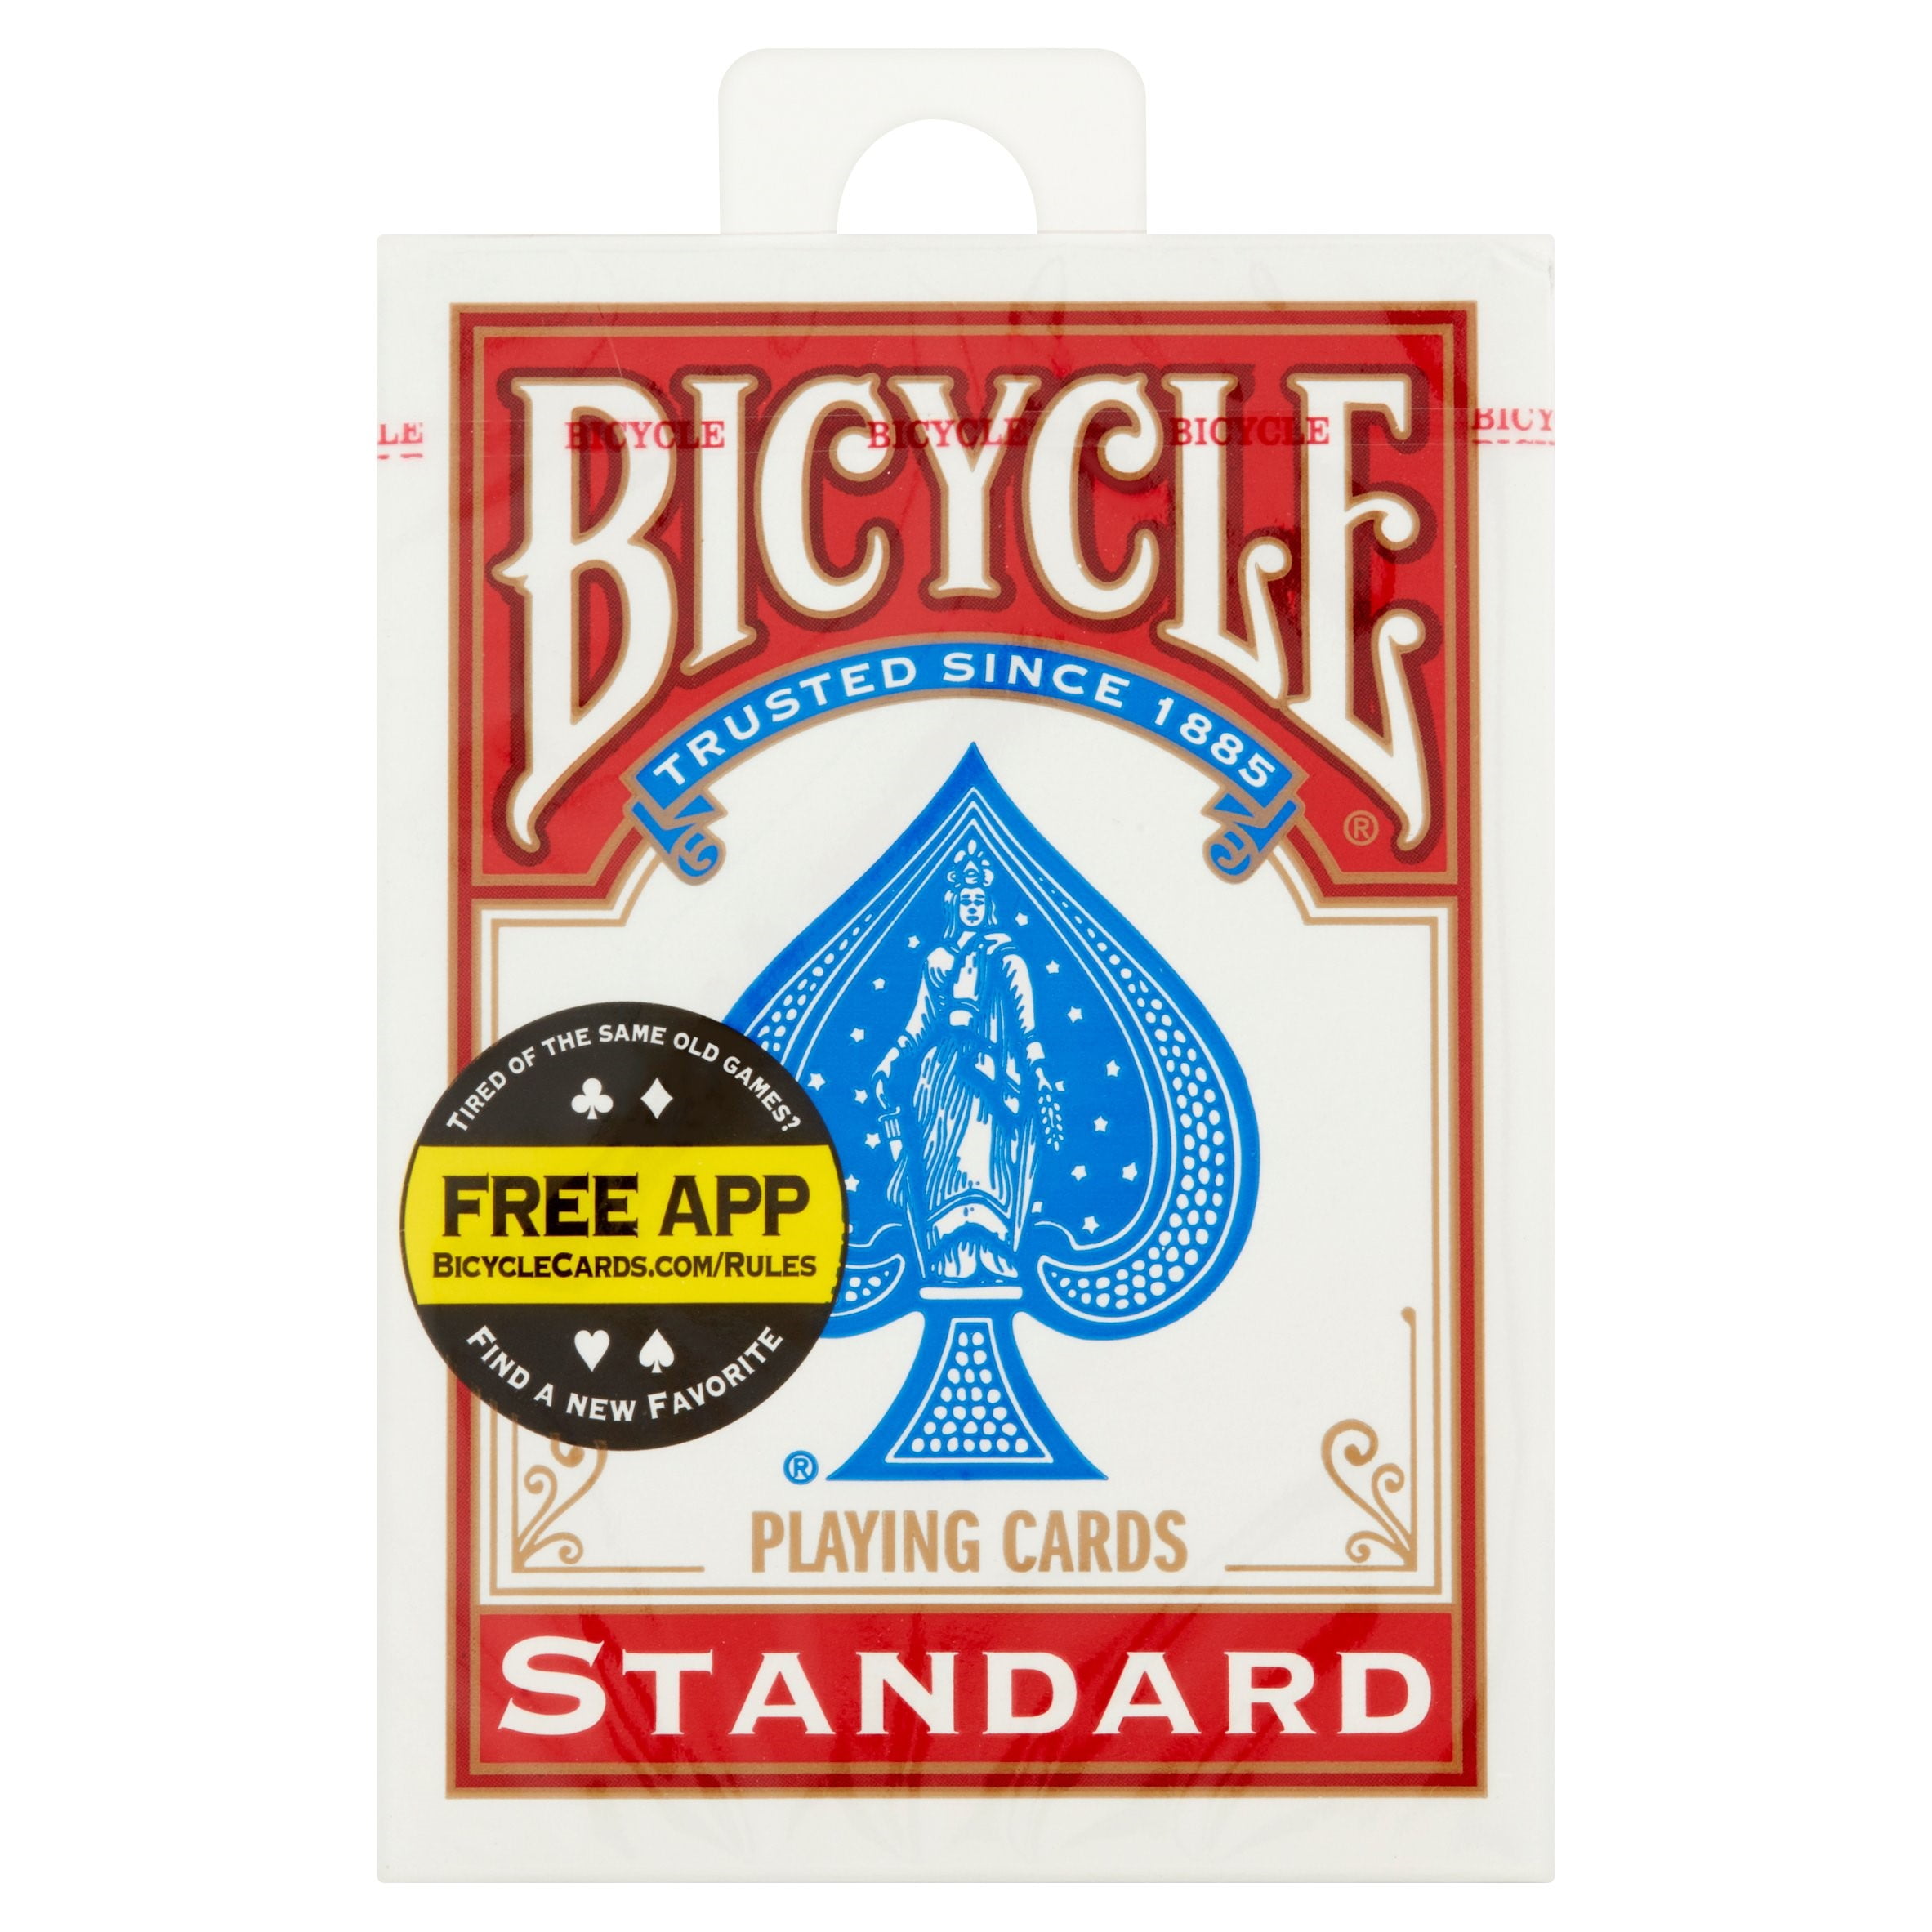 Details about   TWO NEW Sealed Packs Deck of BICYCLE Standard Face Poker Playing Cards Red/blue 